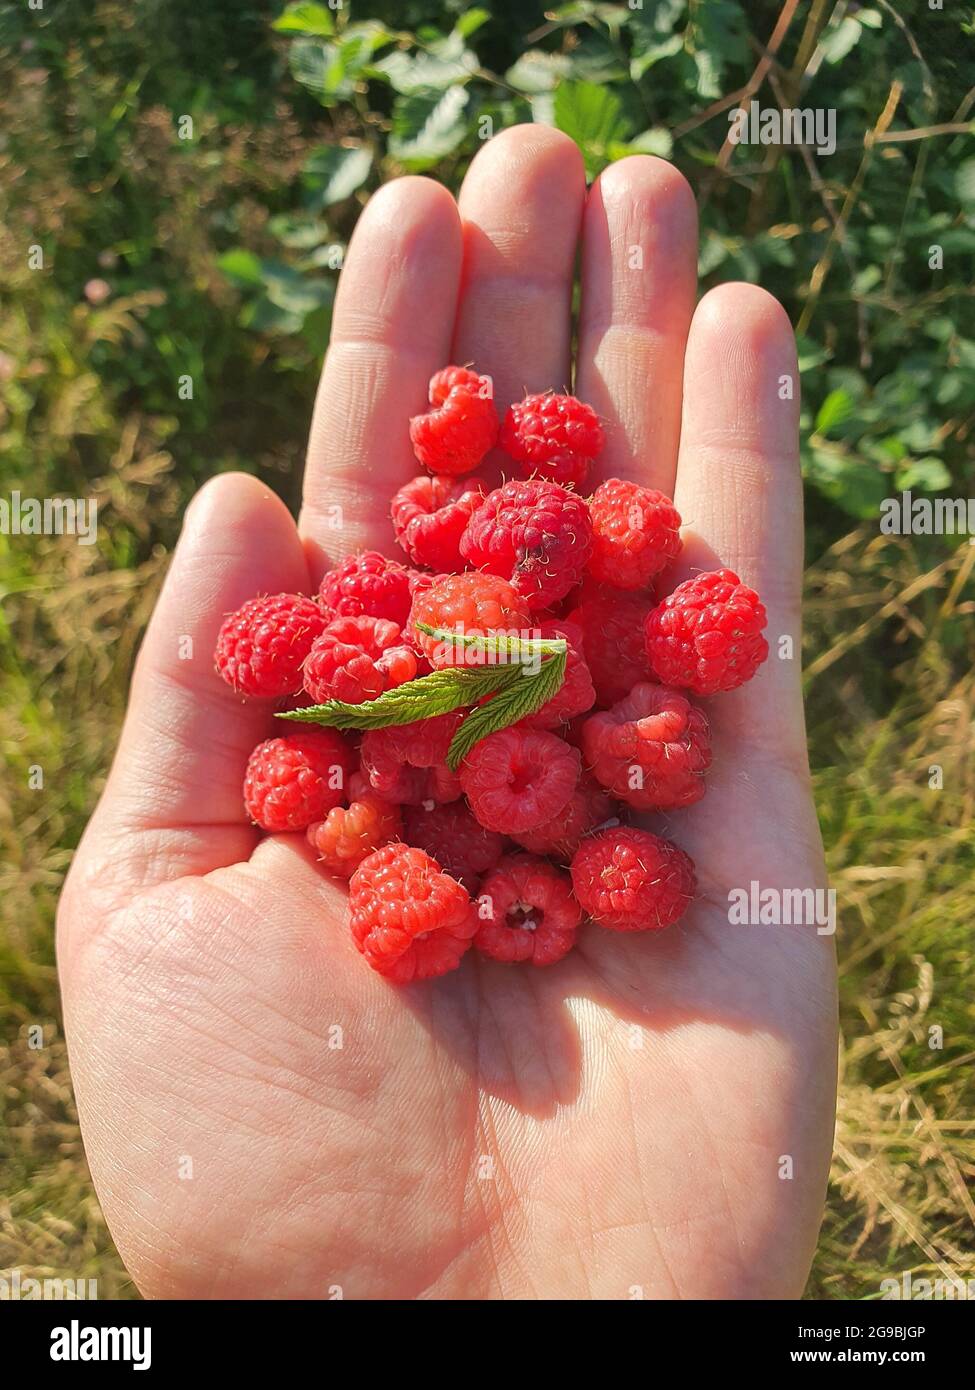 Red, fresh raspberry in hand.  The berries are juicy and tasty. Stock Photo